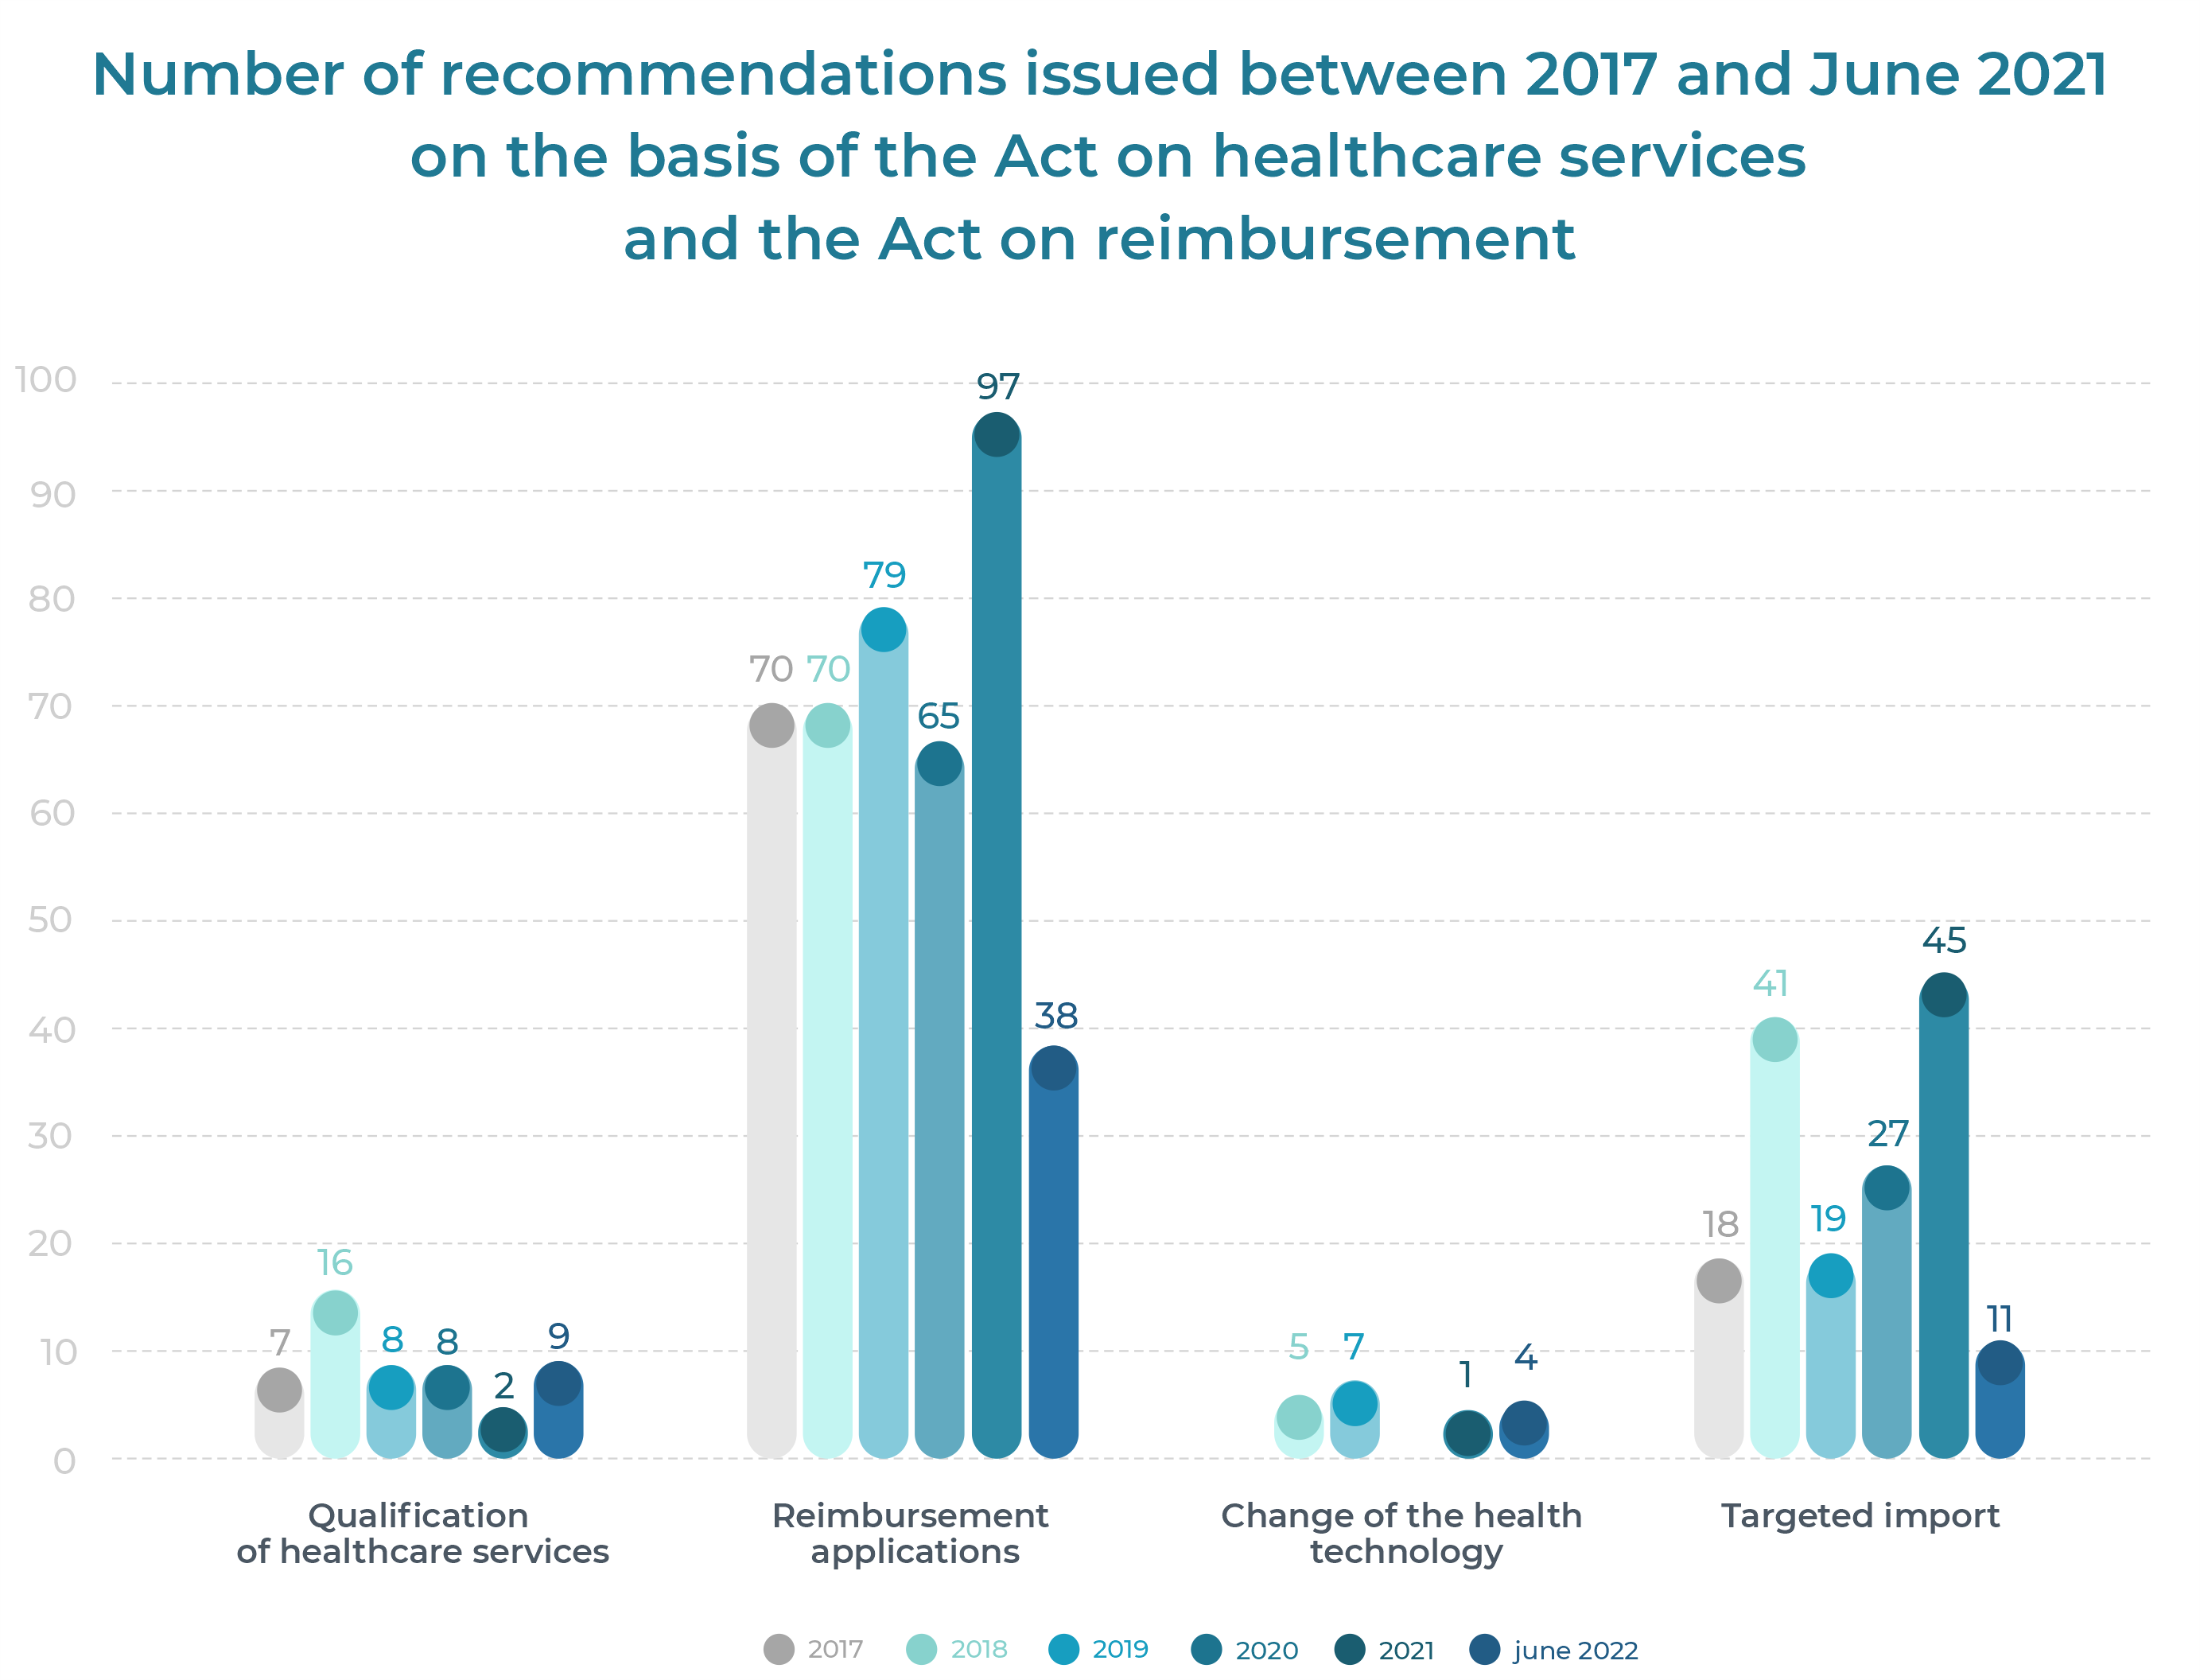 Number of recommendation issued between 2017 and June 2021 on the basis of the Act on healtcare services and the Act on reimbursement